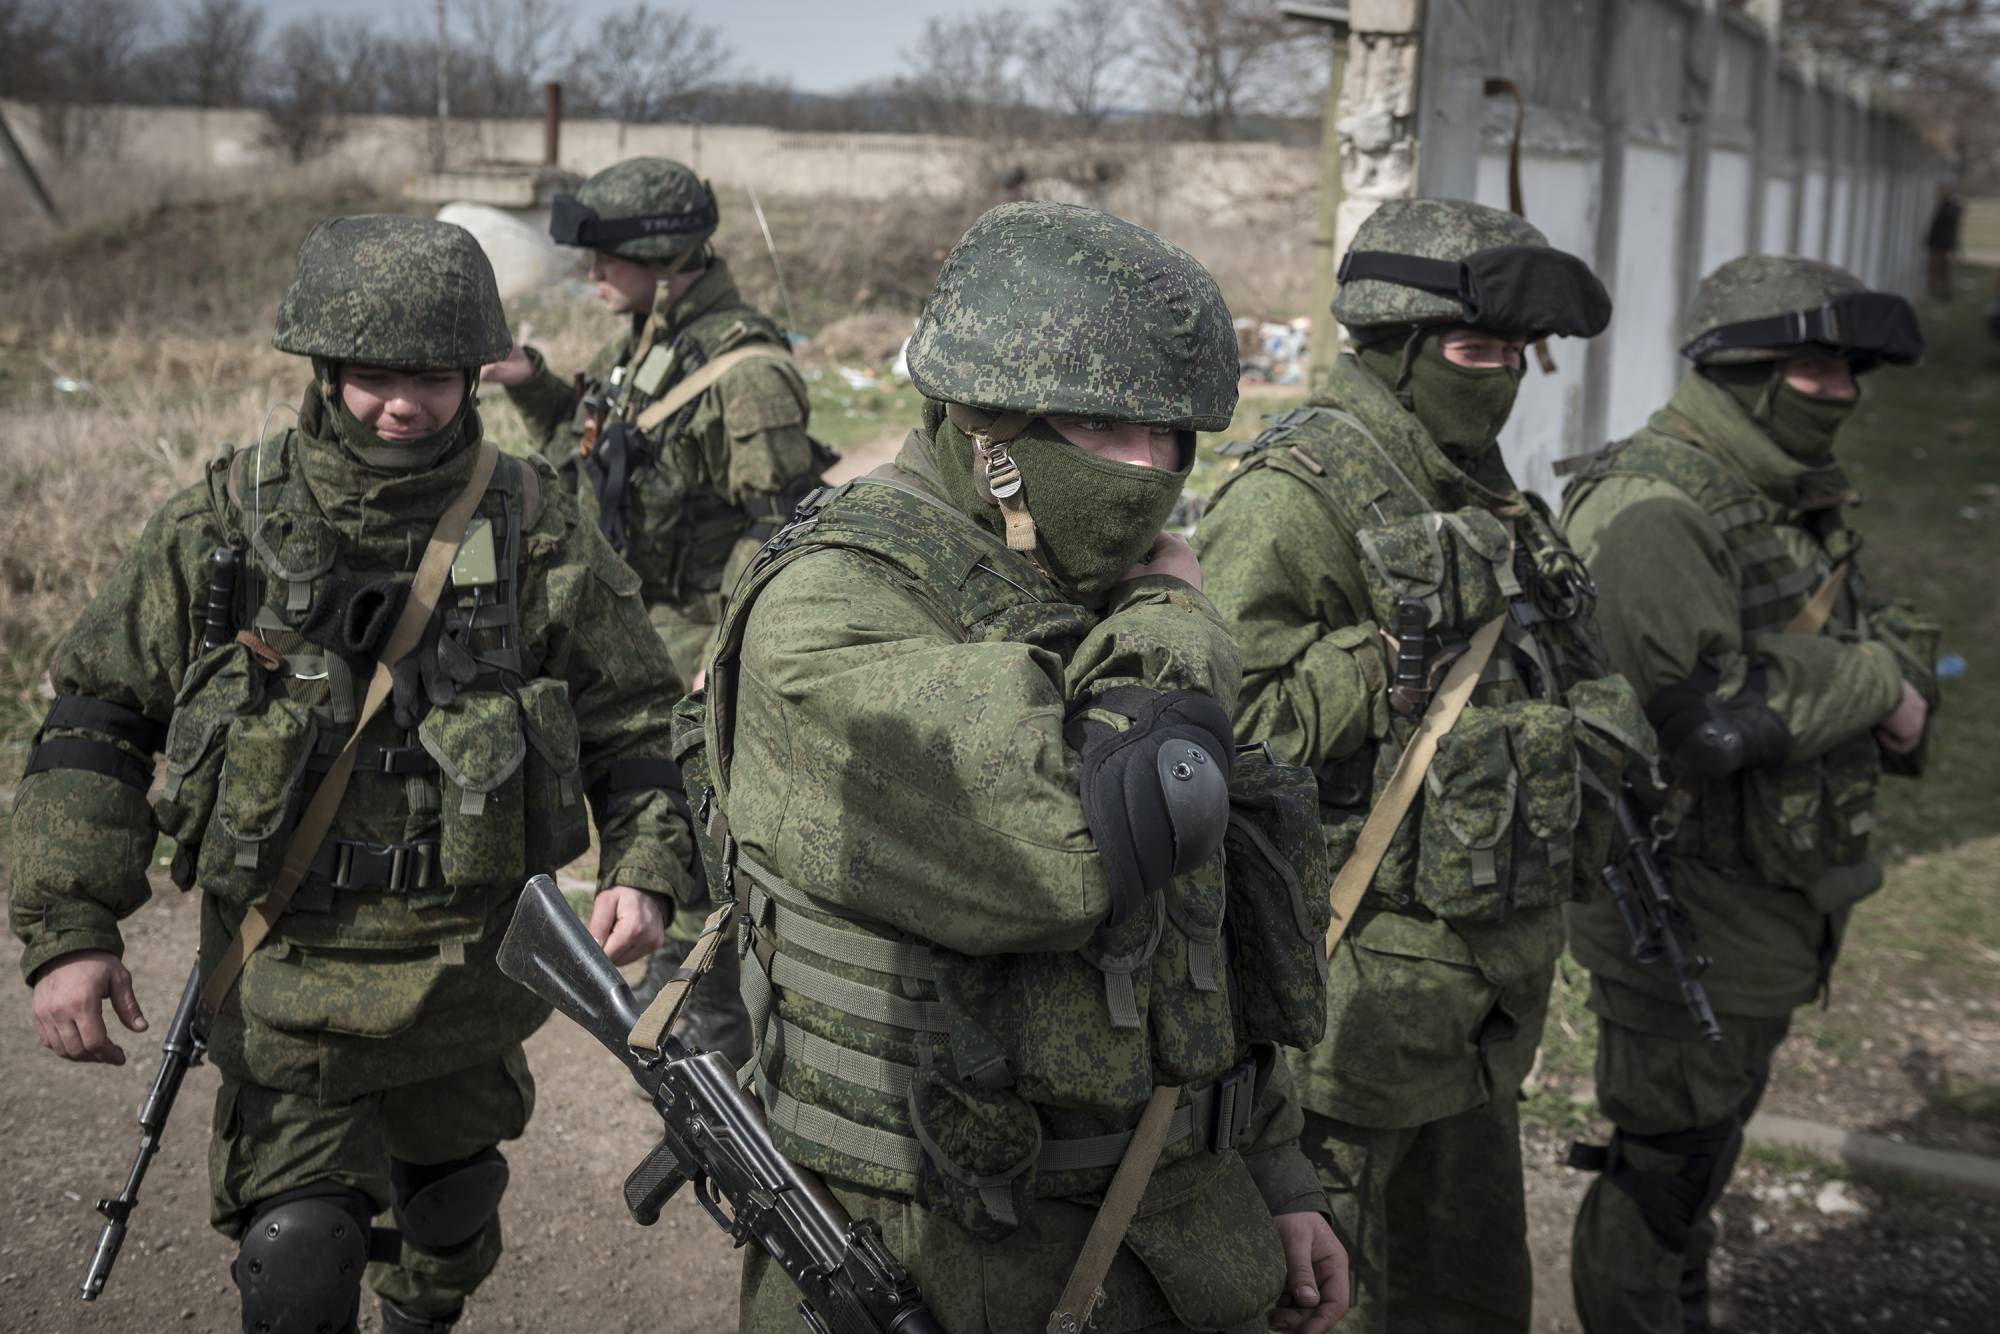 Unidentified soldiers in Crimea, on March 6, 2014. Russia has amassed more troops on the Ukrainian border than at any time since 2014. Western governments are asking: Why now?  | SERGEY PONOMAREV/THE NEW YORK TIMES